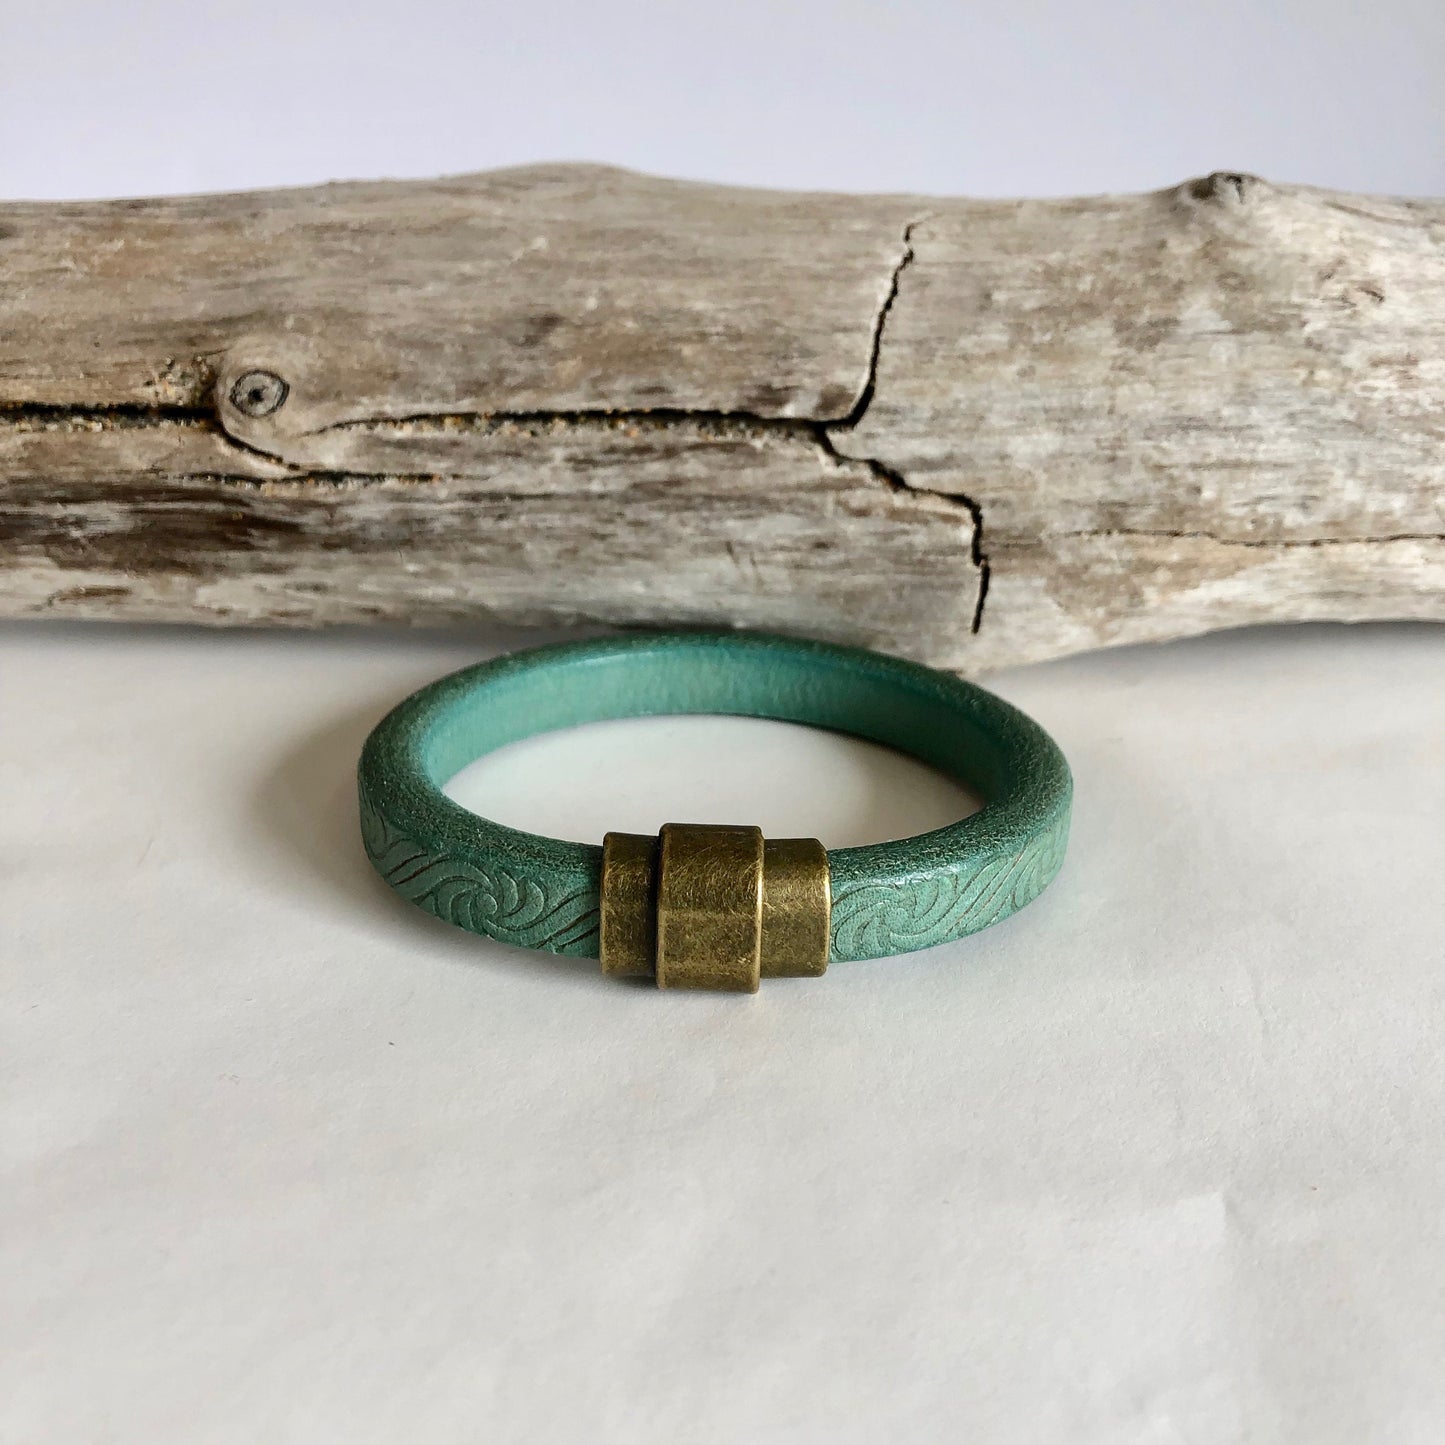 Leather bracelet, made of fine green Italian licorice leather, finished with a quality silver magnetic bullet style clasp.